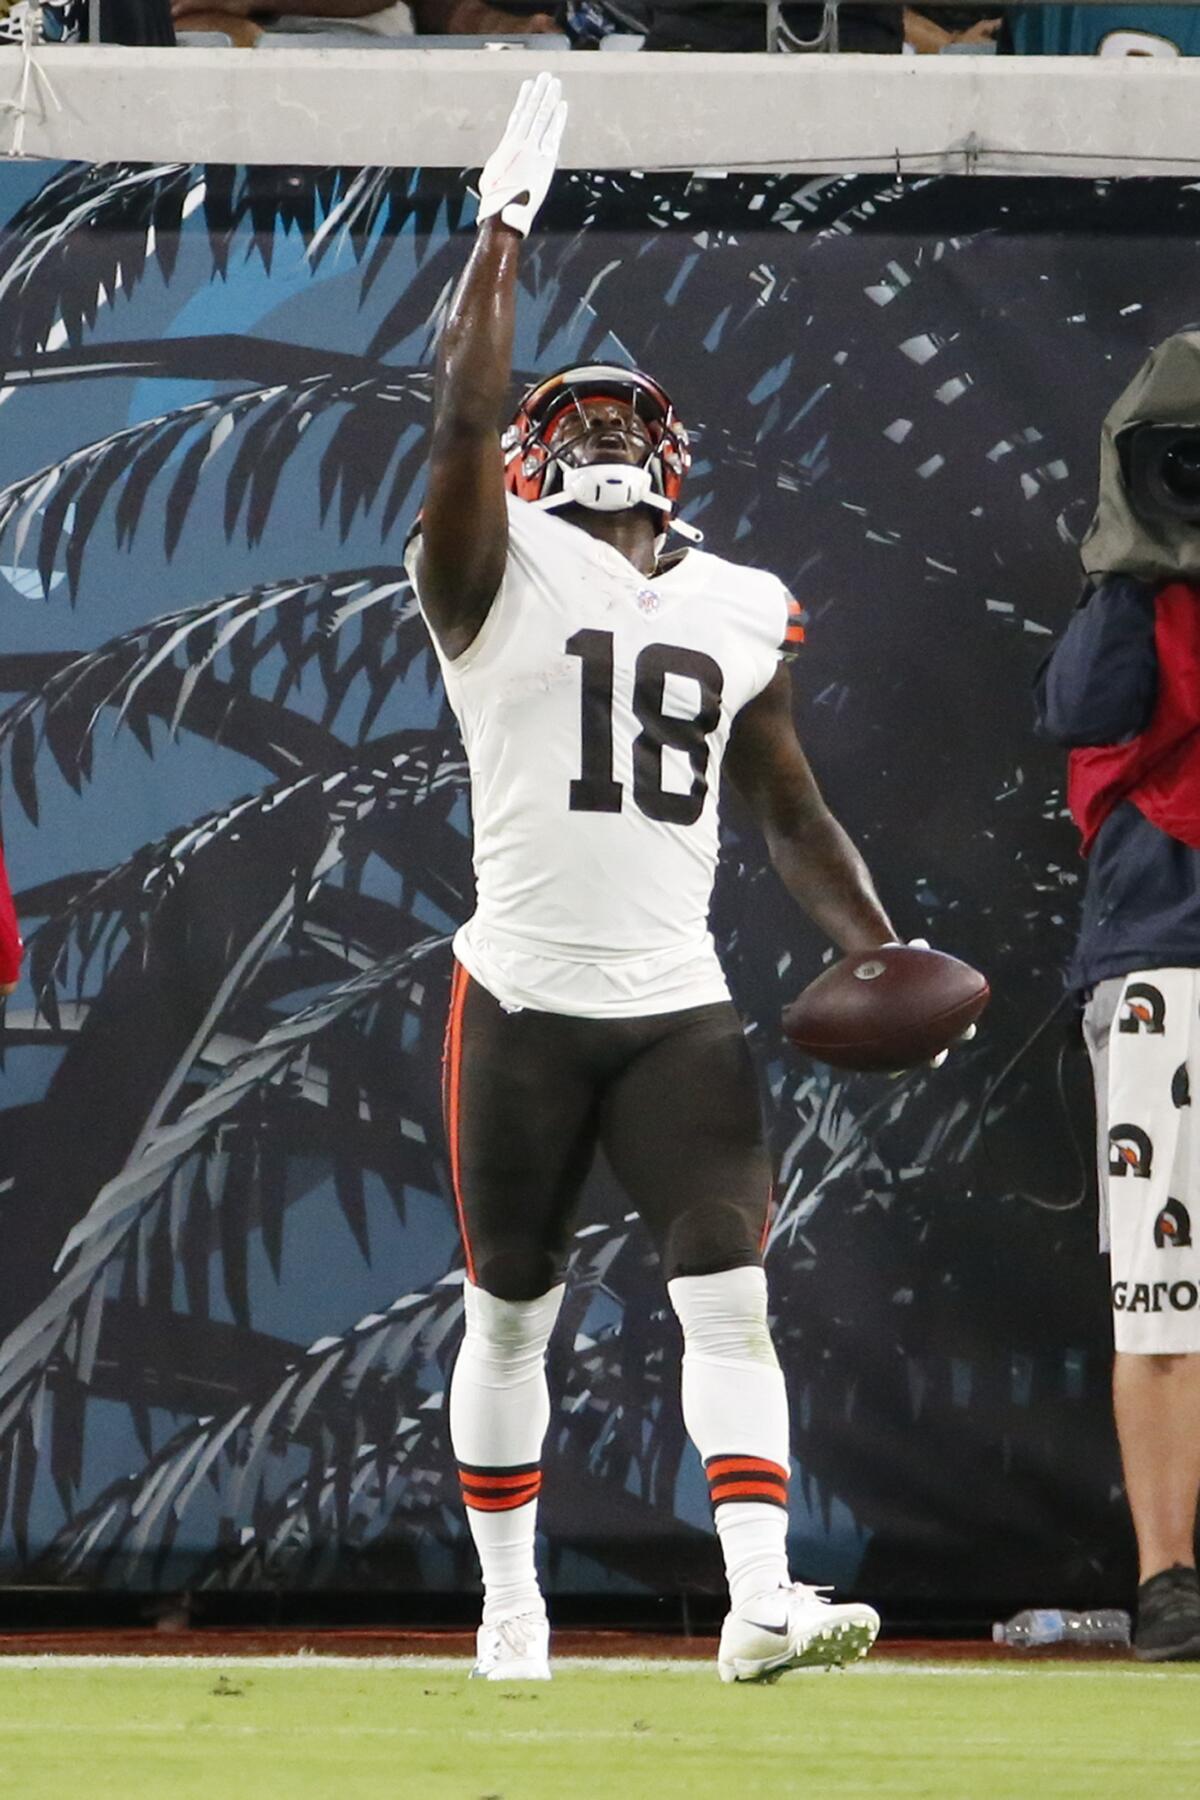 Browns WR Davis suspended 2 games by NFL - The San Diego Union-Tribune